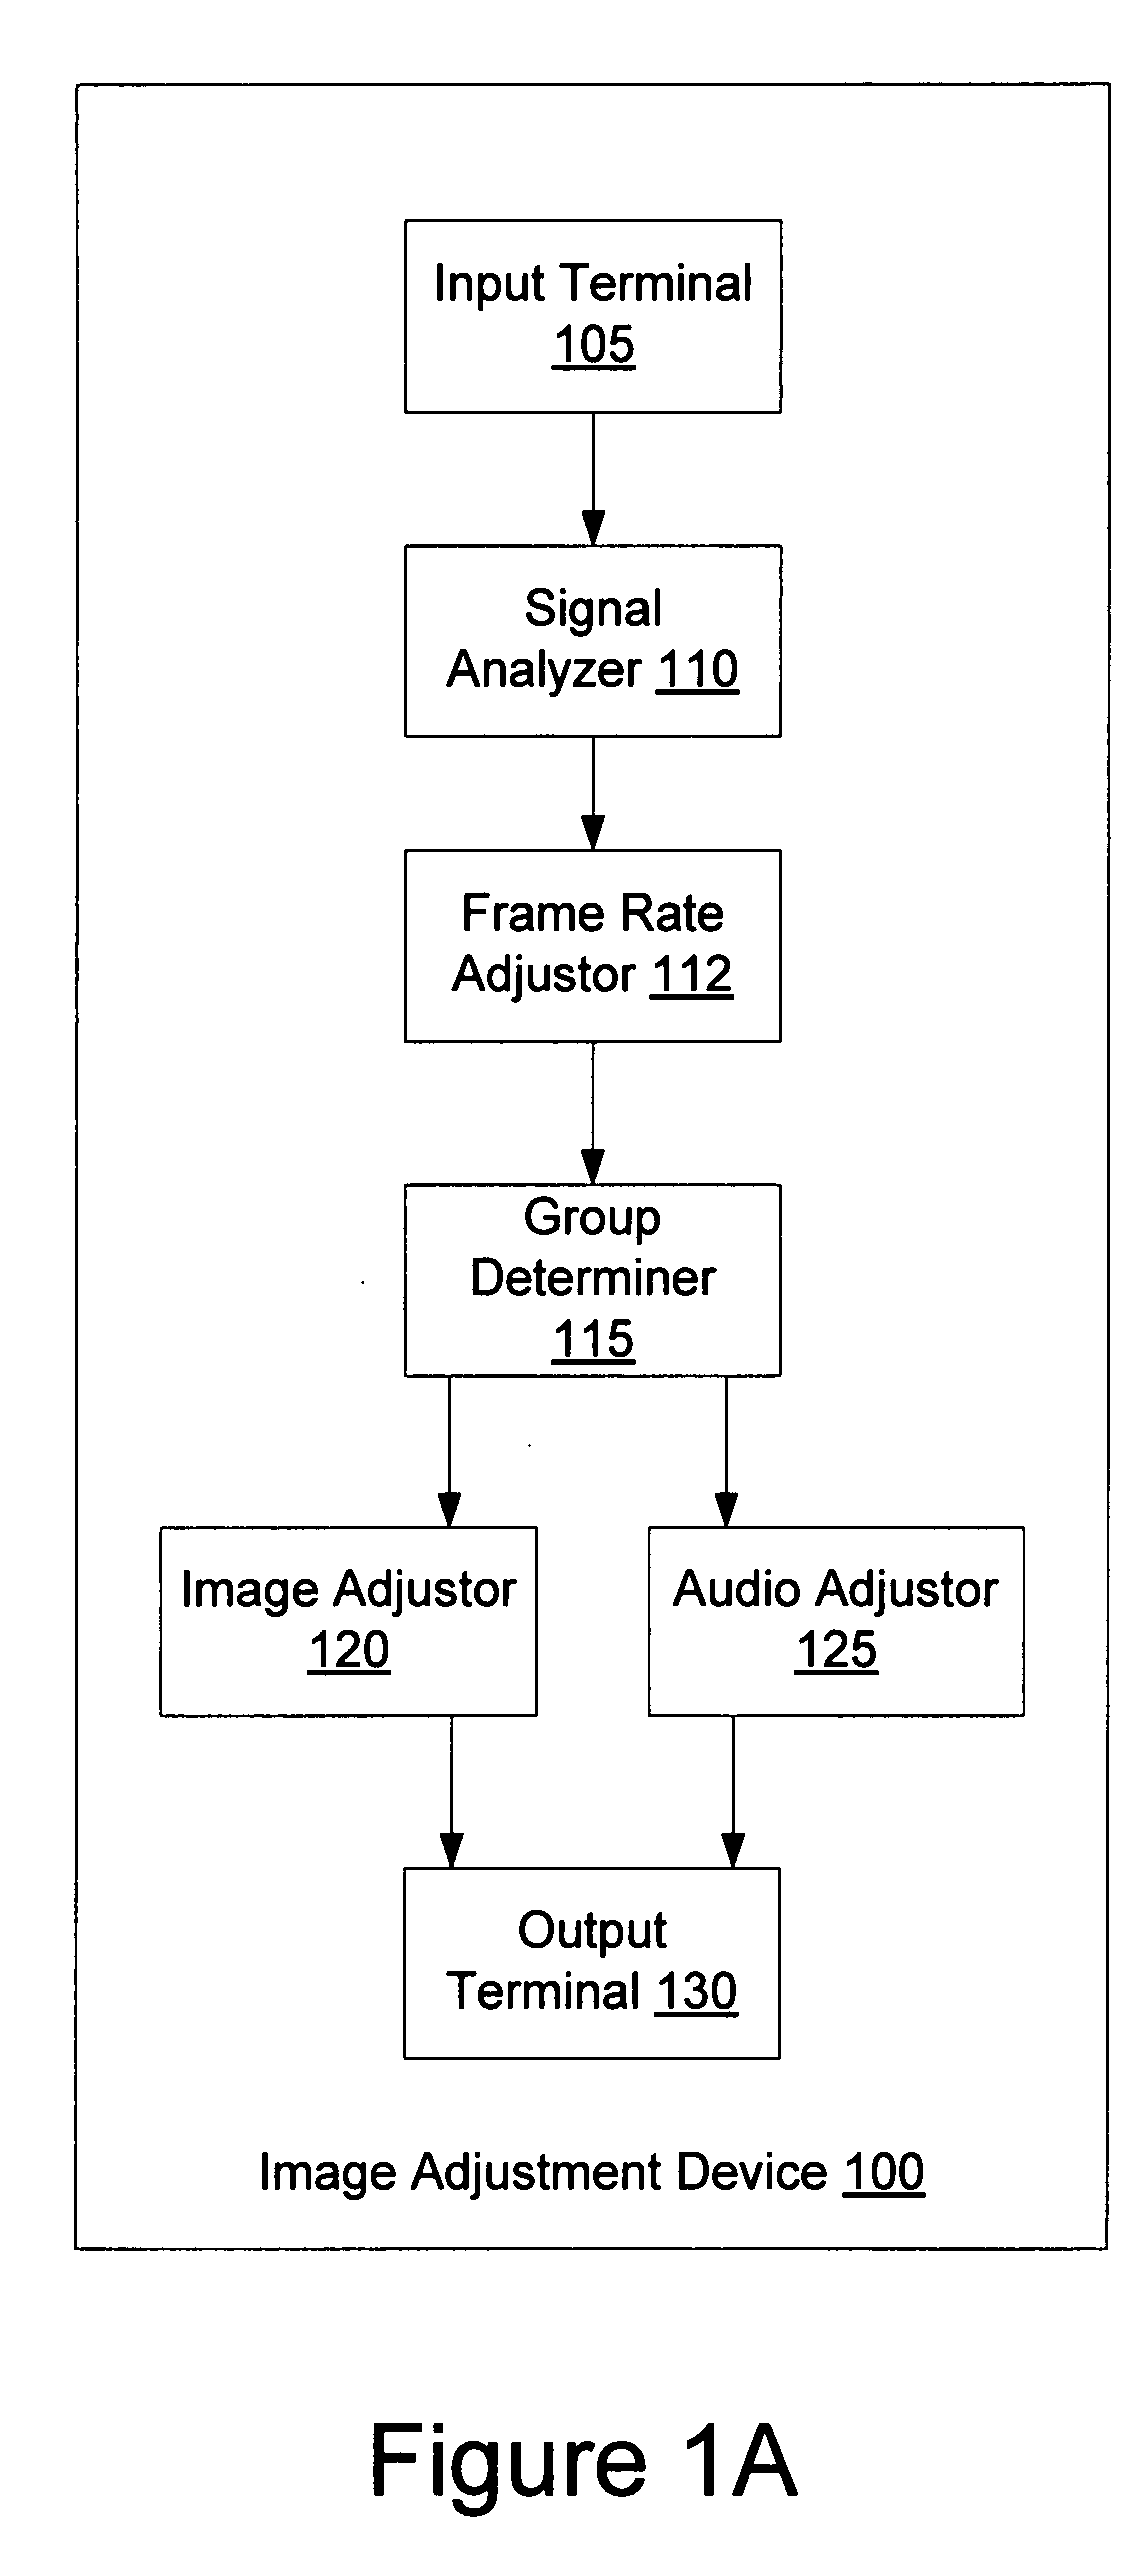 Content based adjustment of an image